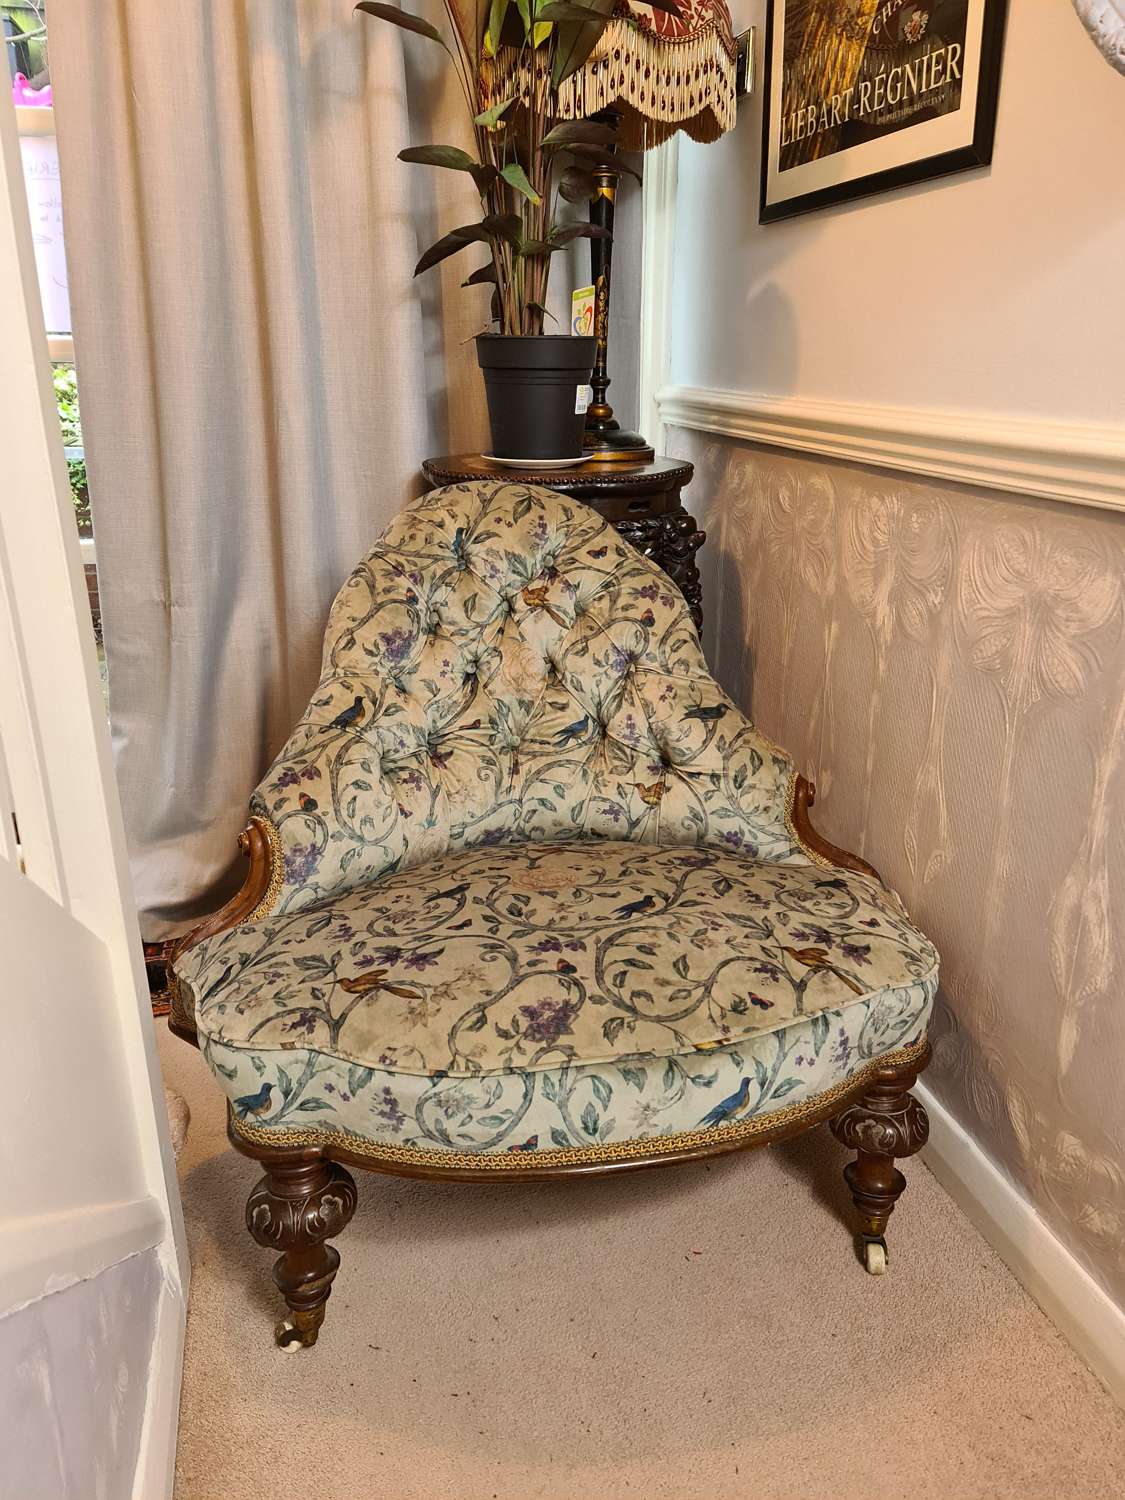 Unusual 19th Century Upholstered Corner Seat or Boudoir Chair